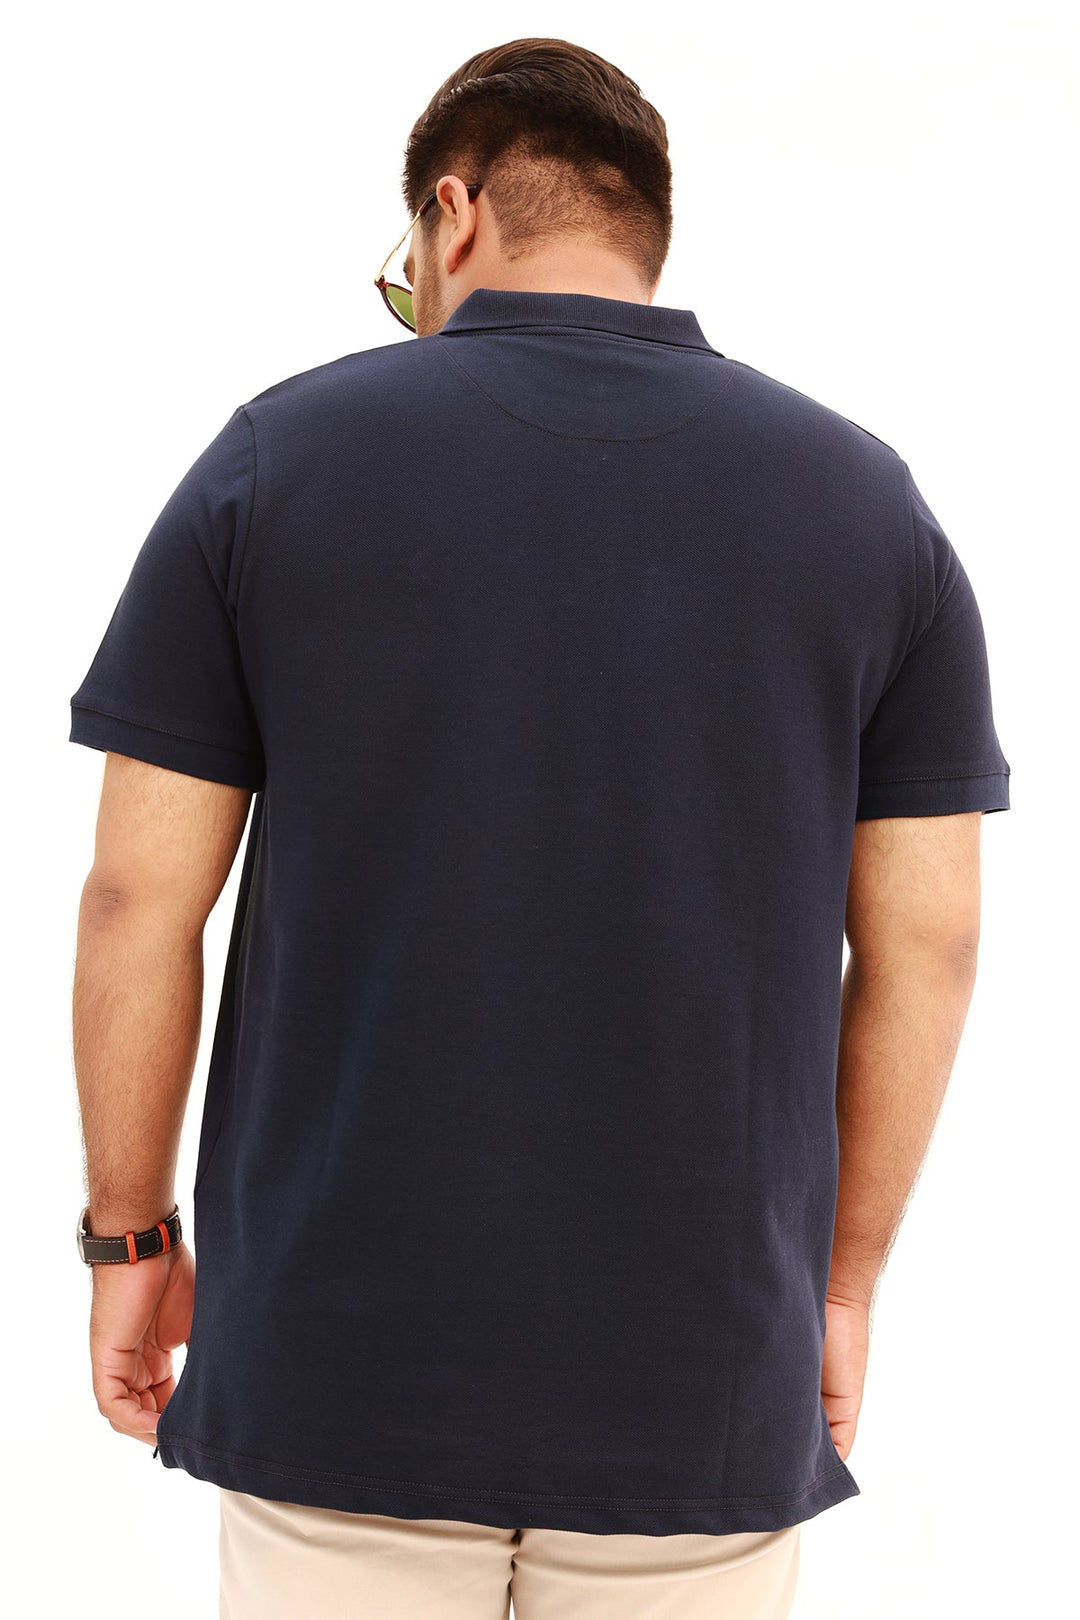 Dark Blue Embroidered Polo Shirt (Plus Size) - S22 - MP0096P